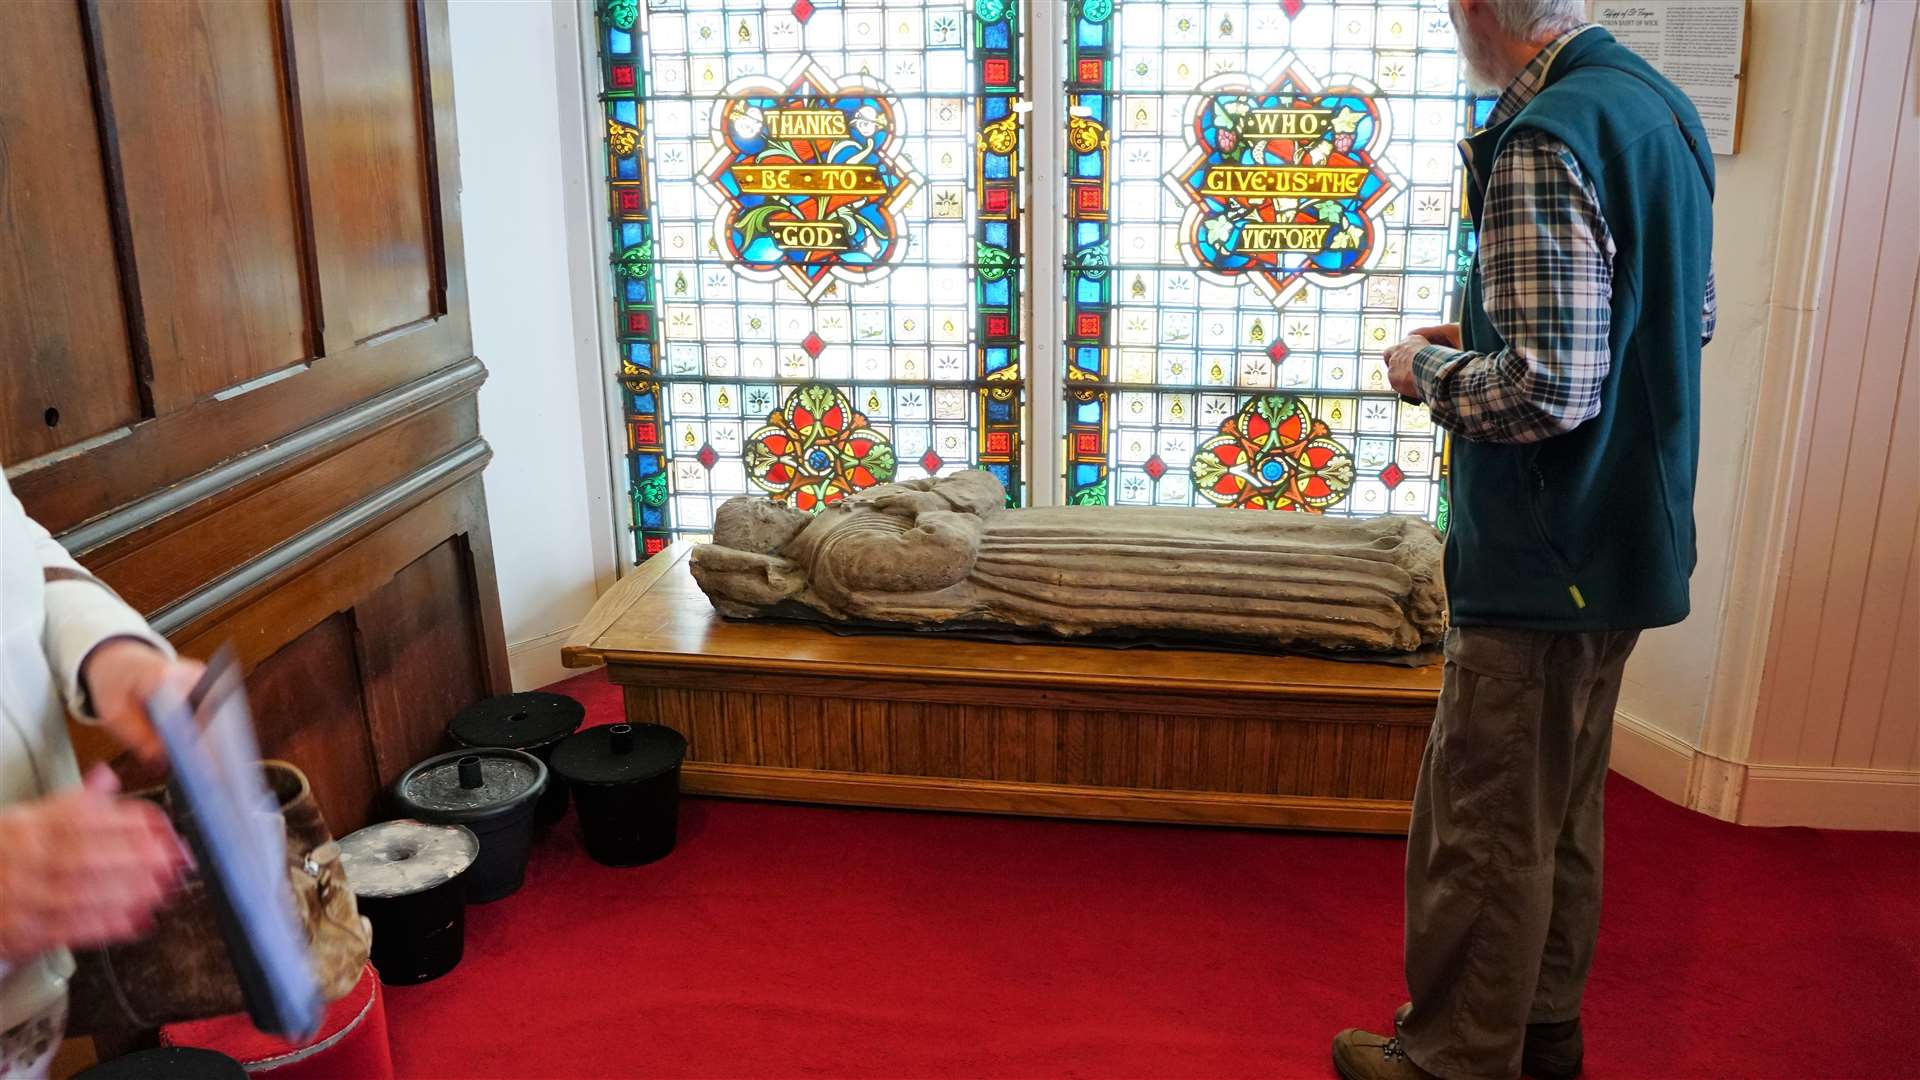 The visit to Wick provided a chance to see the effigy of St Fergus inside the church. Picture: DGS